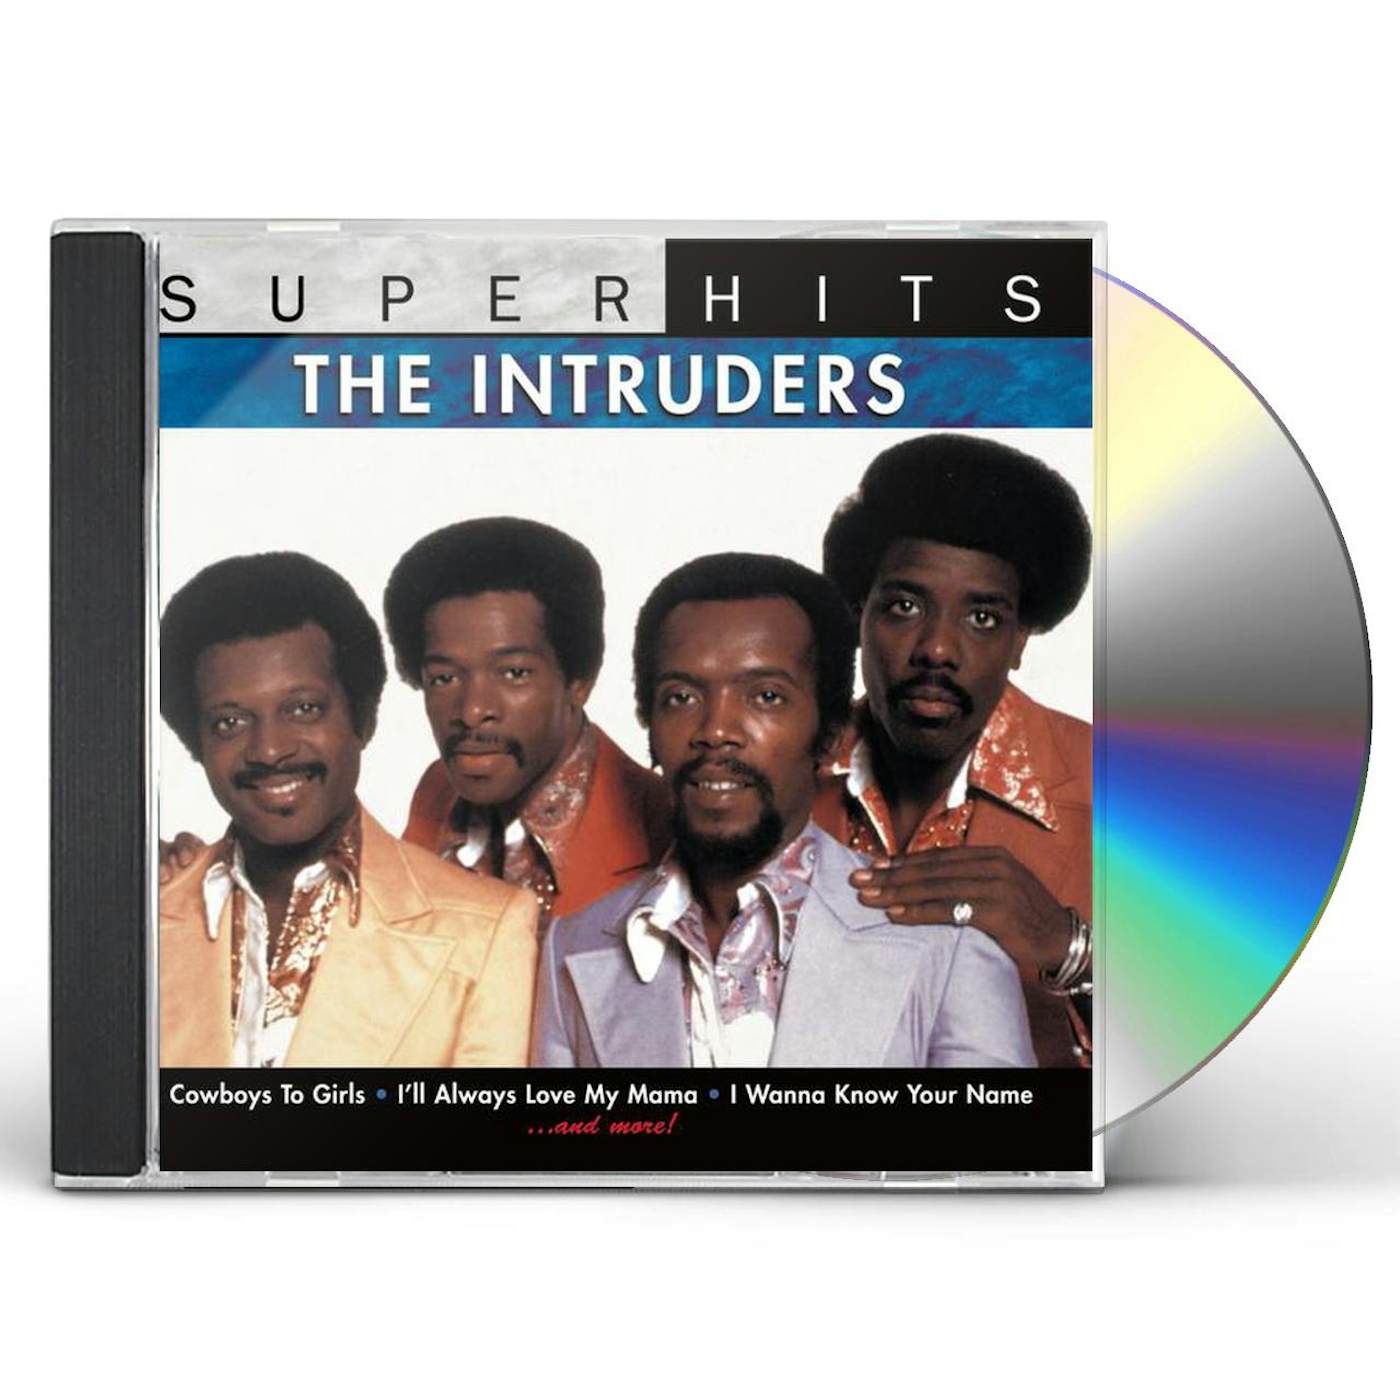 The Intruders  Soul Discovery